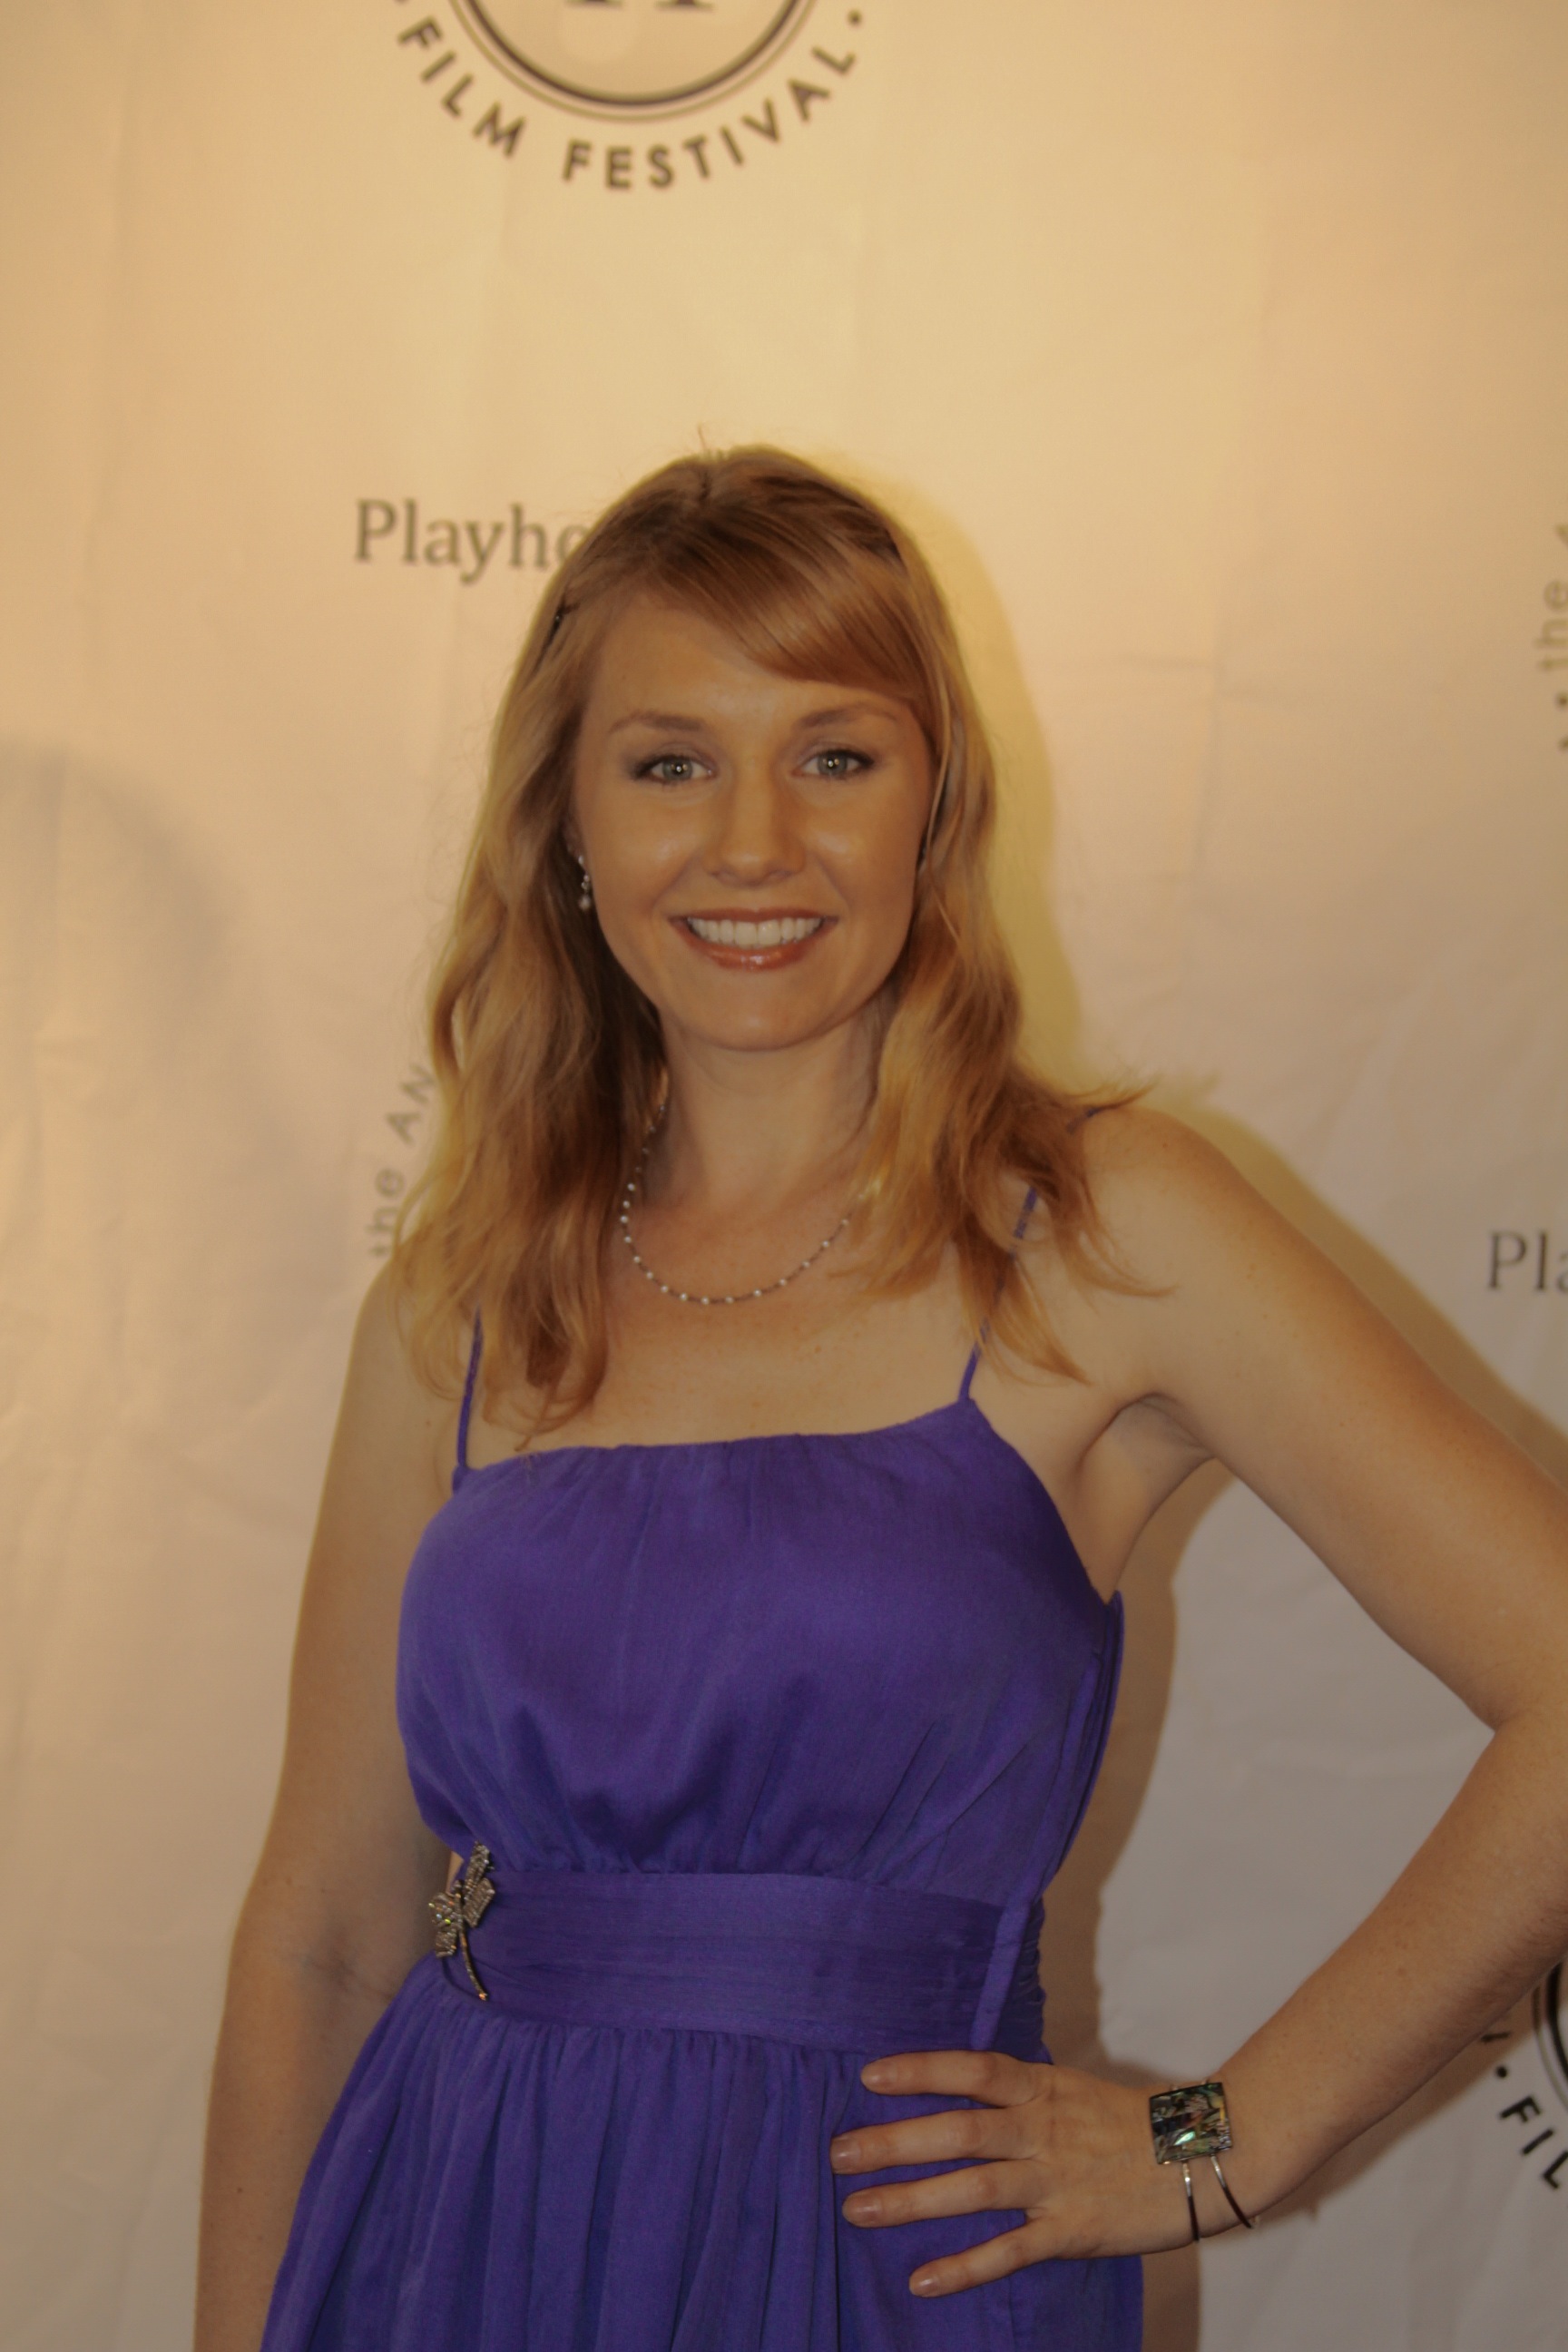 Red Carpet at Playhouse West Film Festival